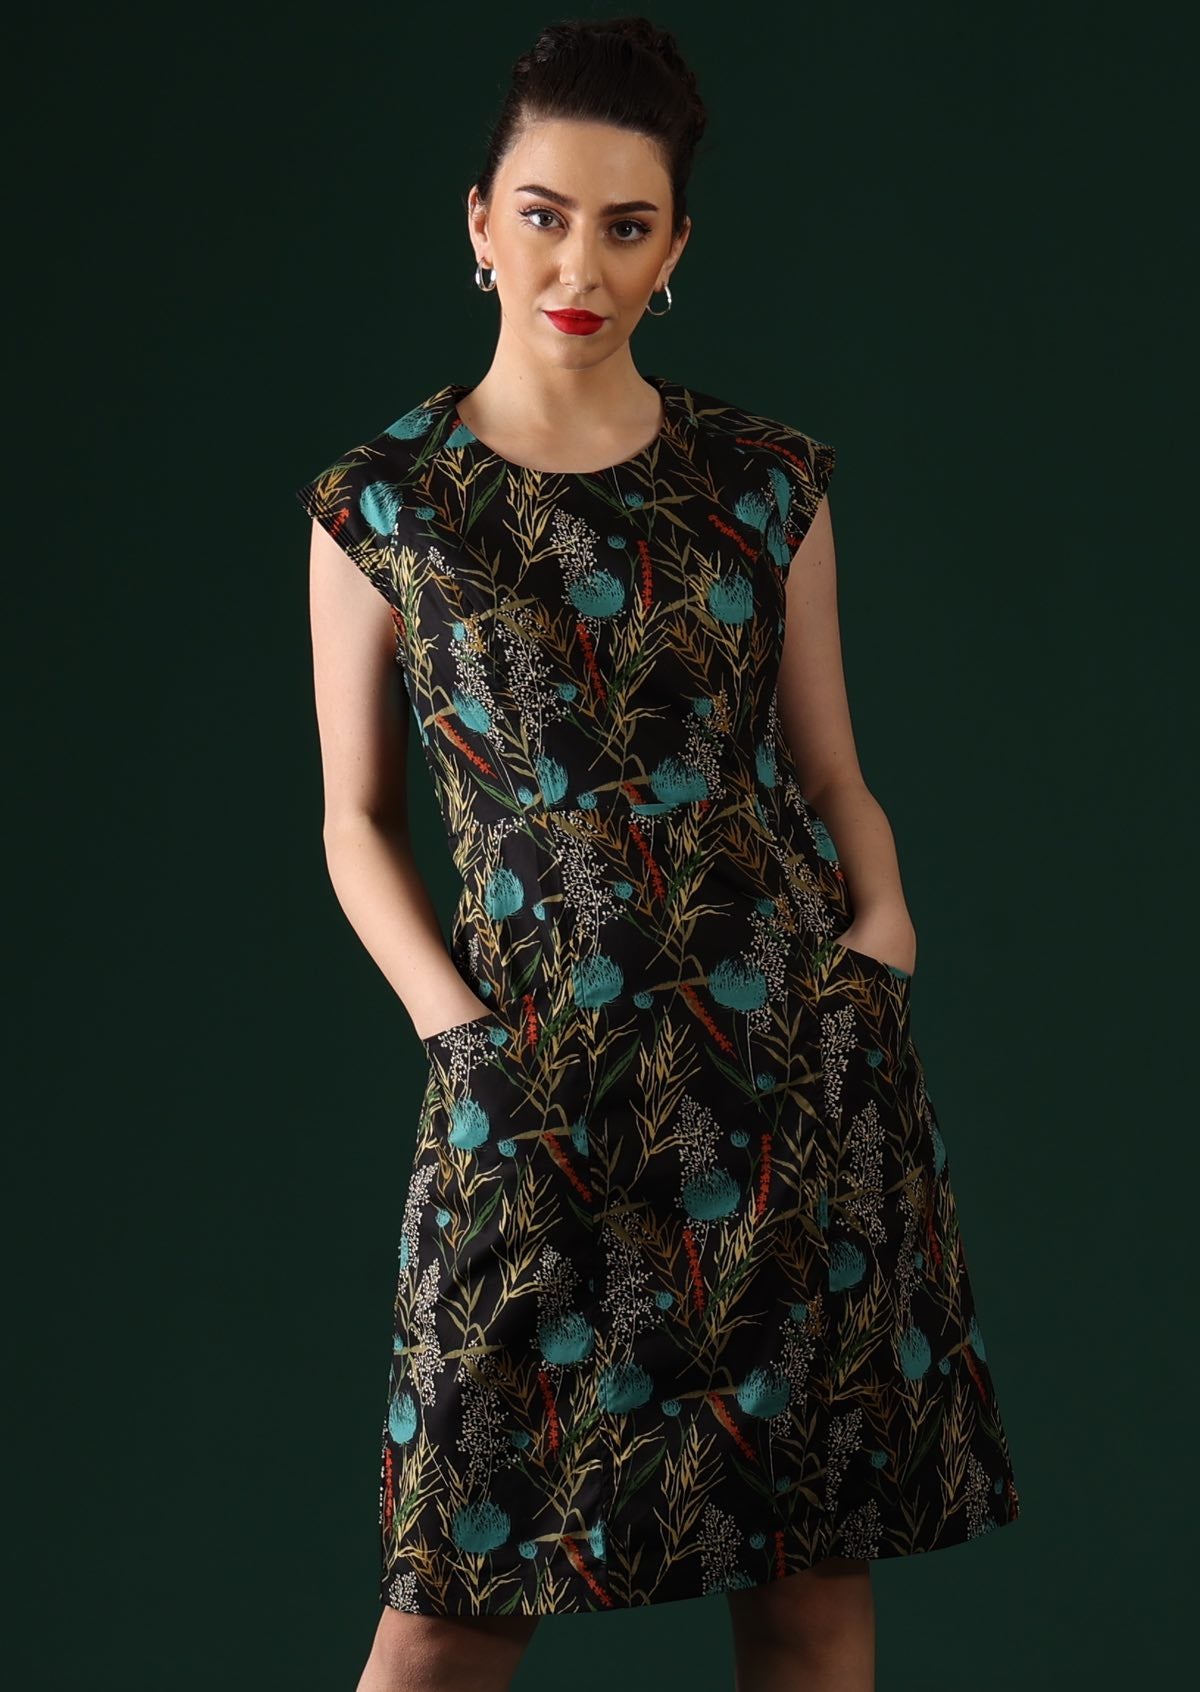 Model wears floral dress with cap sleeves.